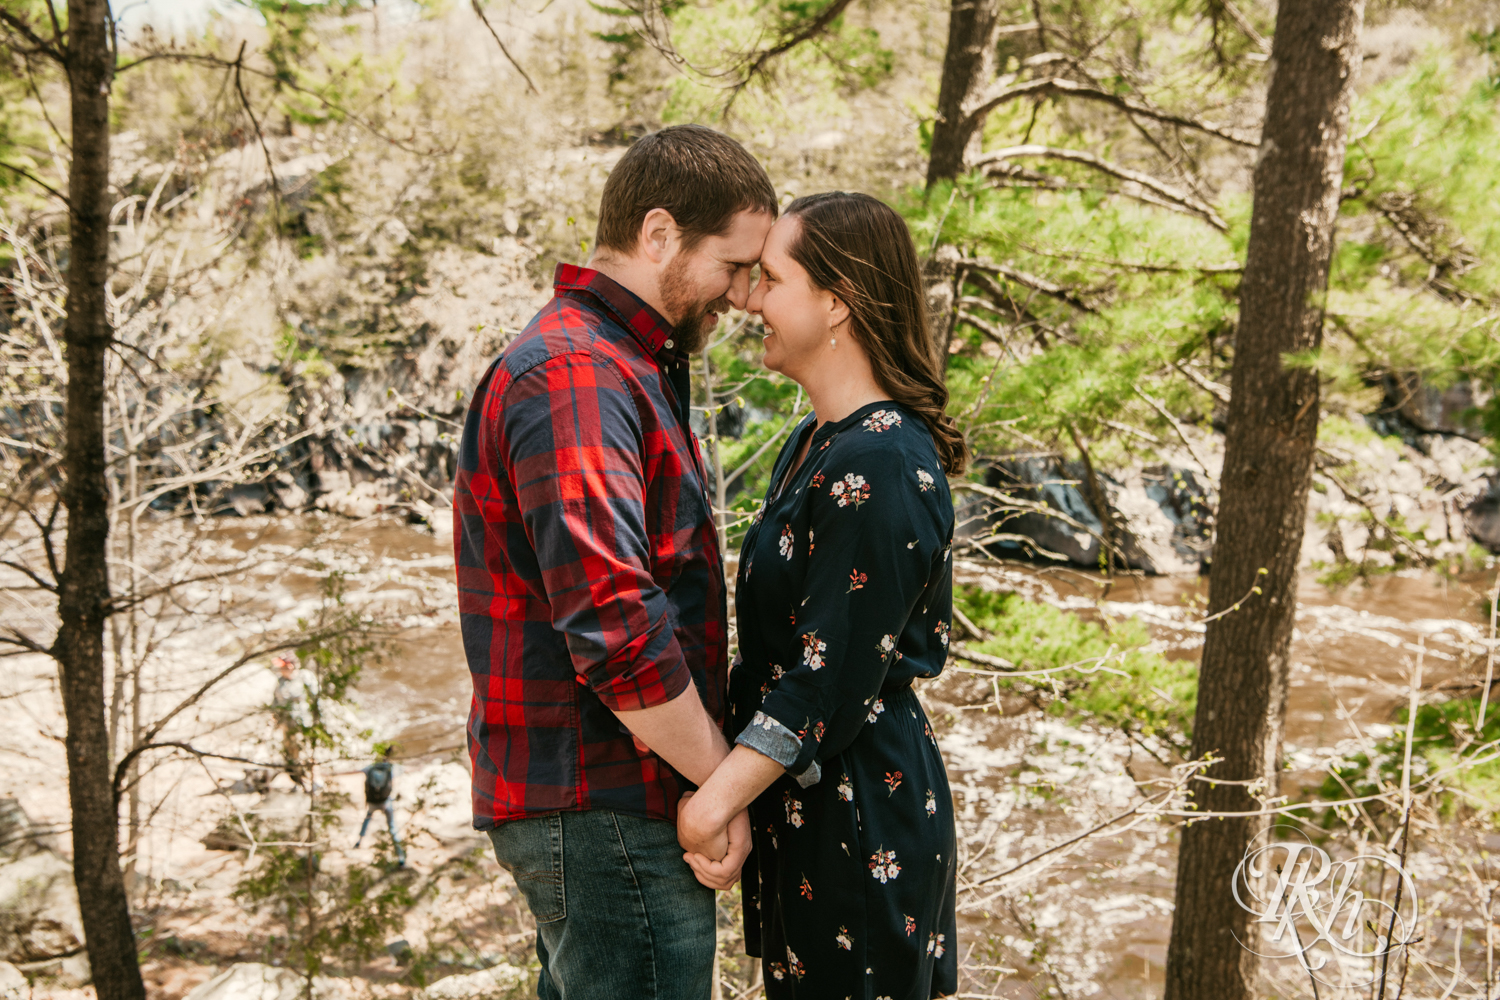 Man in flannel and jeans and woman in dress smile on cliff over river in Taylor's Falls, Minnesota.